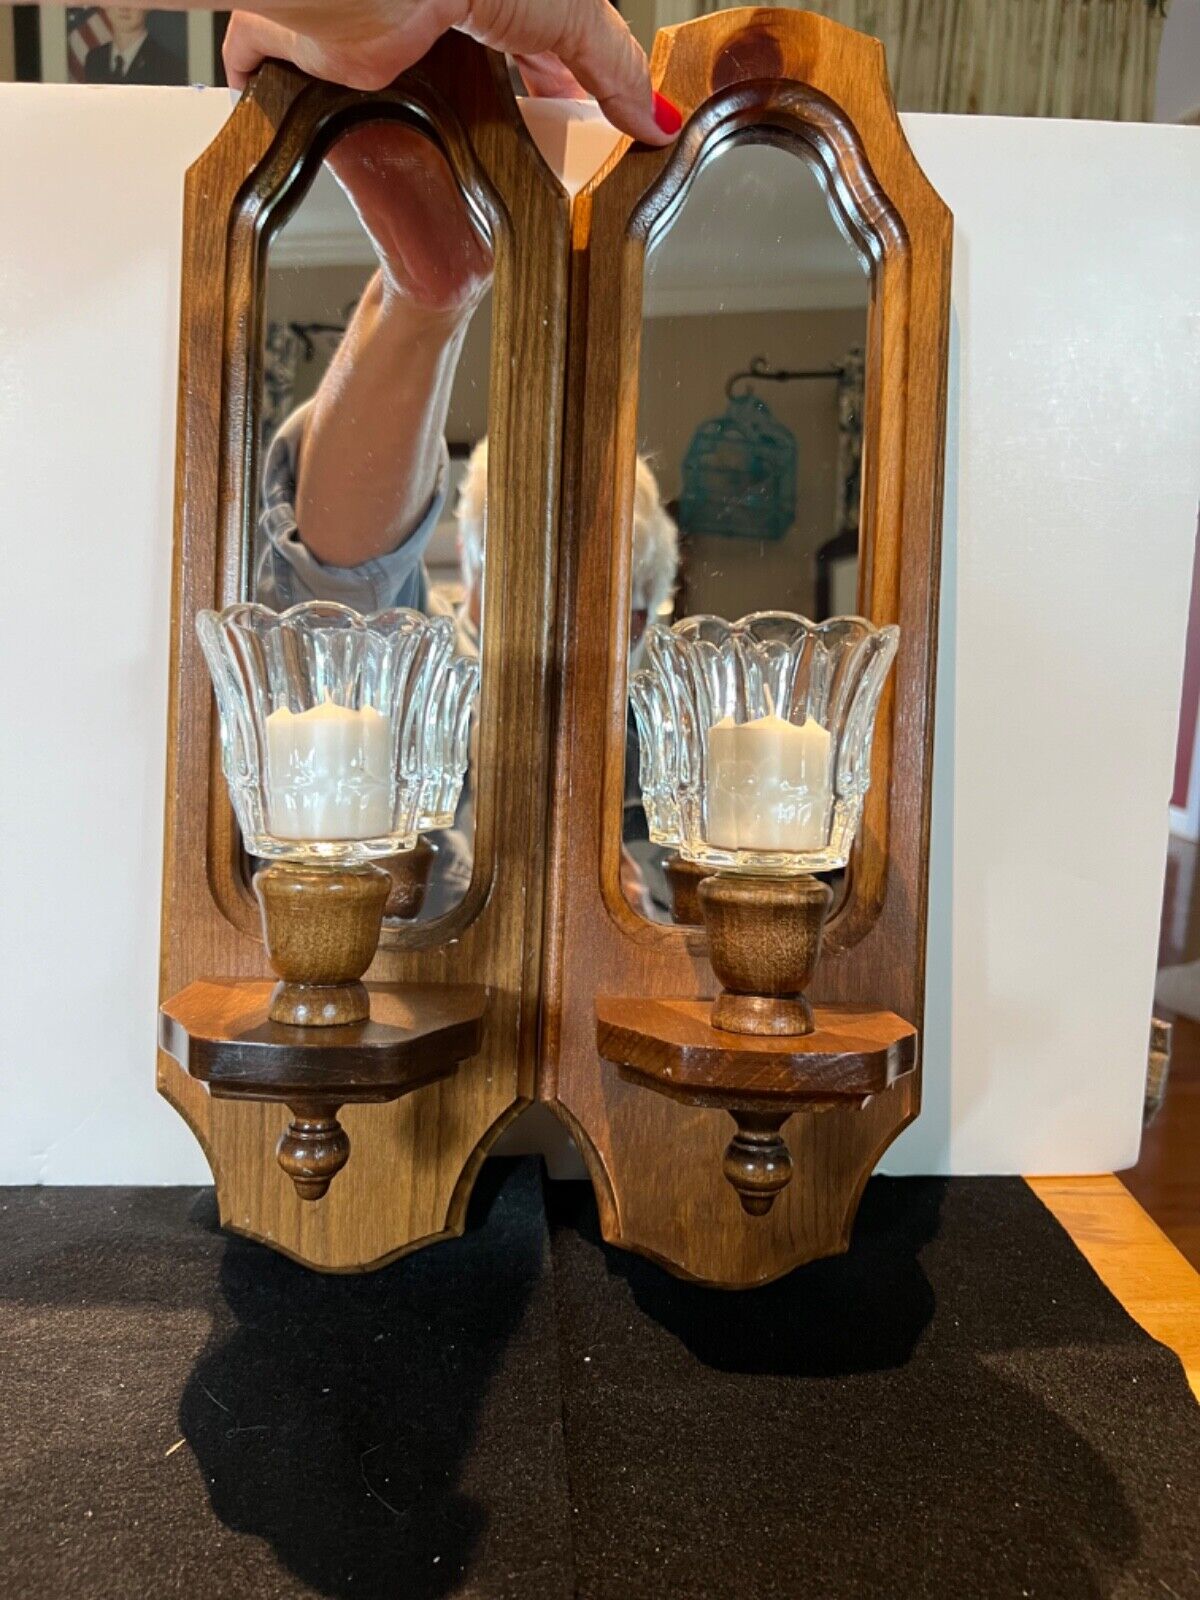 Vntg Pair of Wood Candle Holder Wall Sconces with Inset Mirror and glass votive